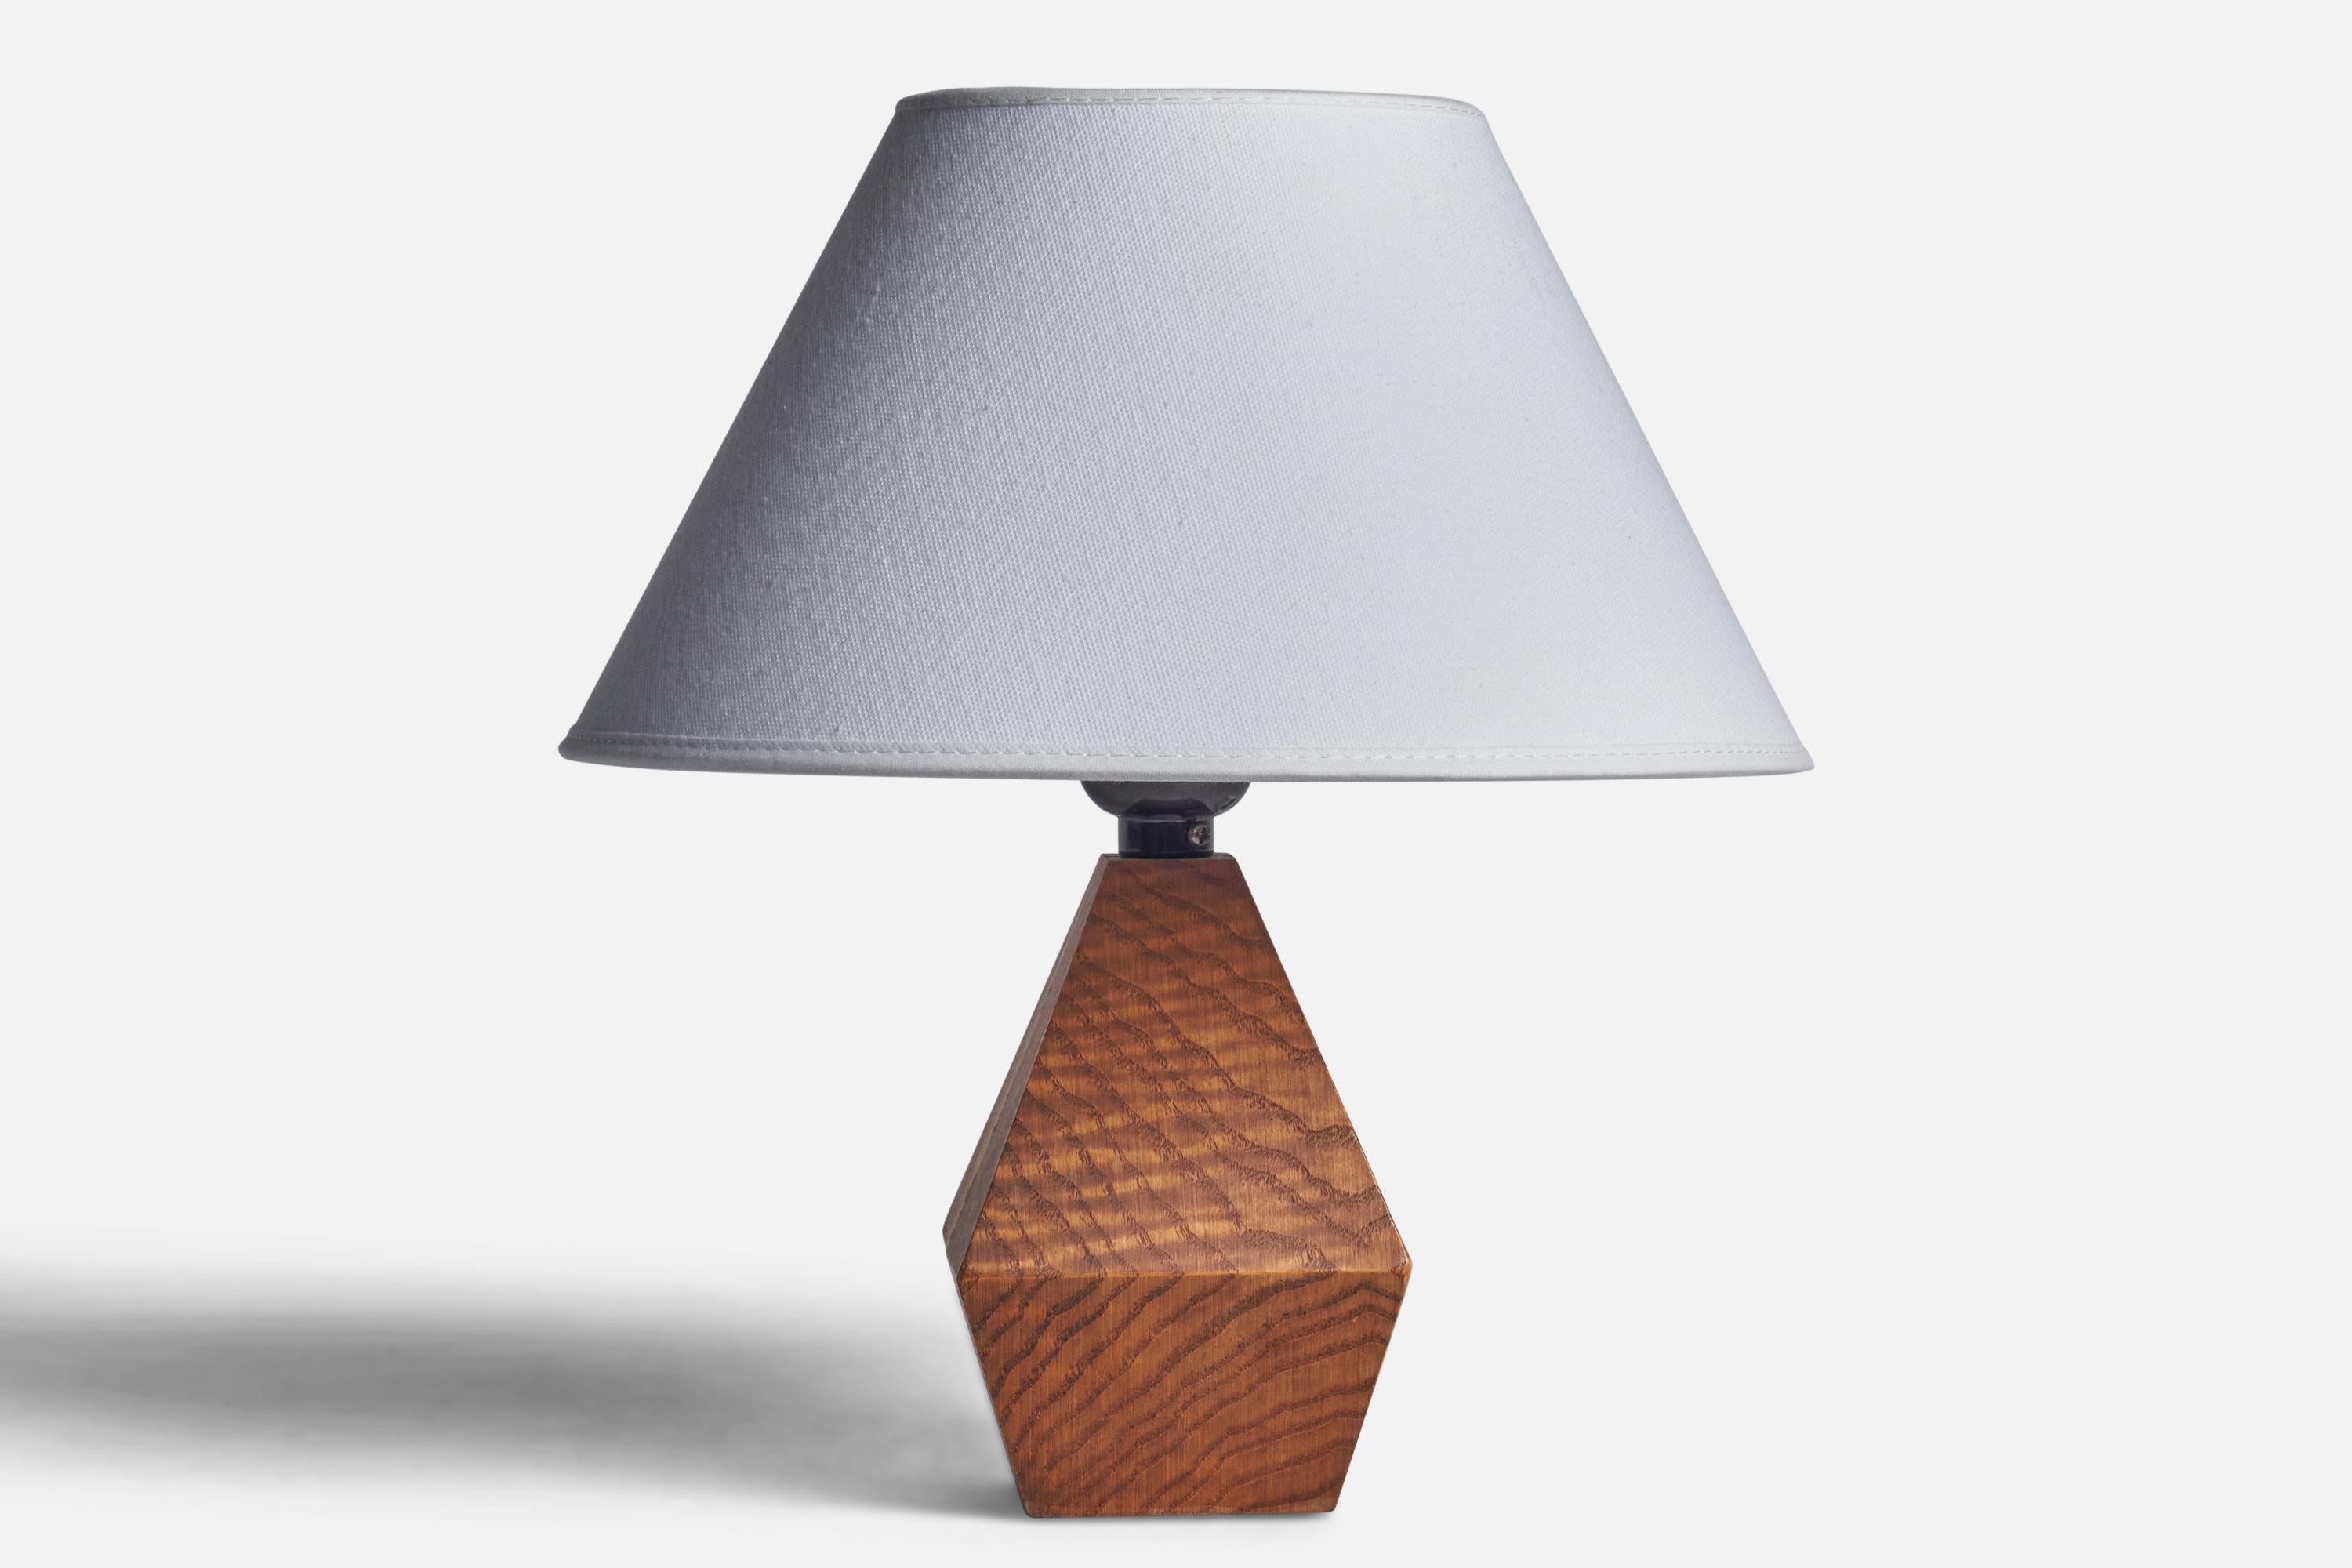 A pine table lamp designed and produced in Sweden, 1960s.

Dimensions of Lamp (inches): 8” H x 3.5” Diameter
Dimensions of Shade (inches): 7” Top Diameter x 10” Bottom Diameter x 5.5” H 
Dimensions of Lamp with Shade (inches): 11.25” H x